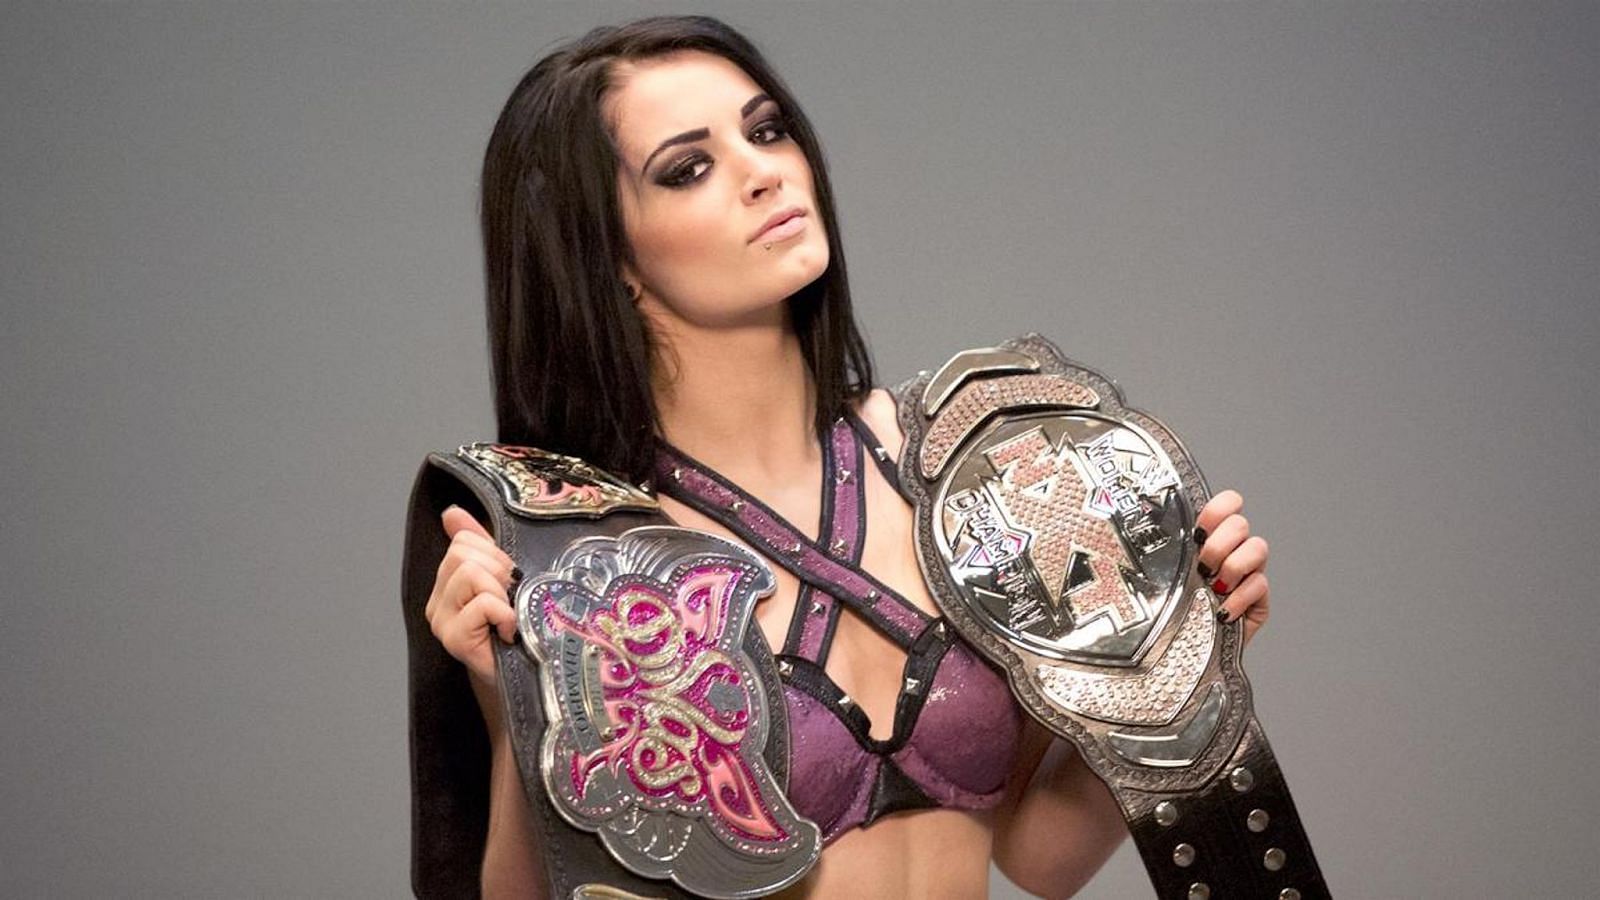 [Image Credits: Sportskeeda] Paige with both NXT Women&rsquo;s and Divas Championship